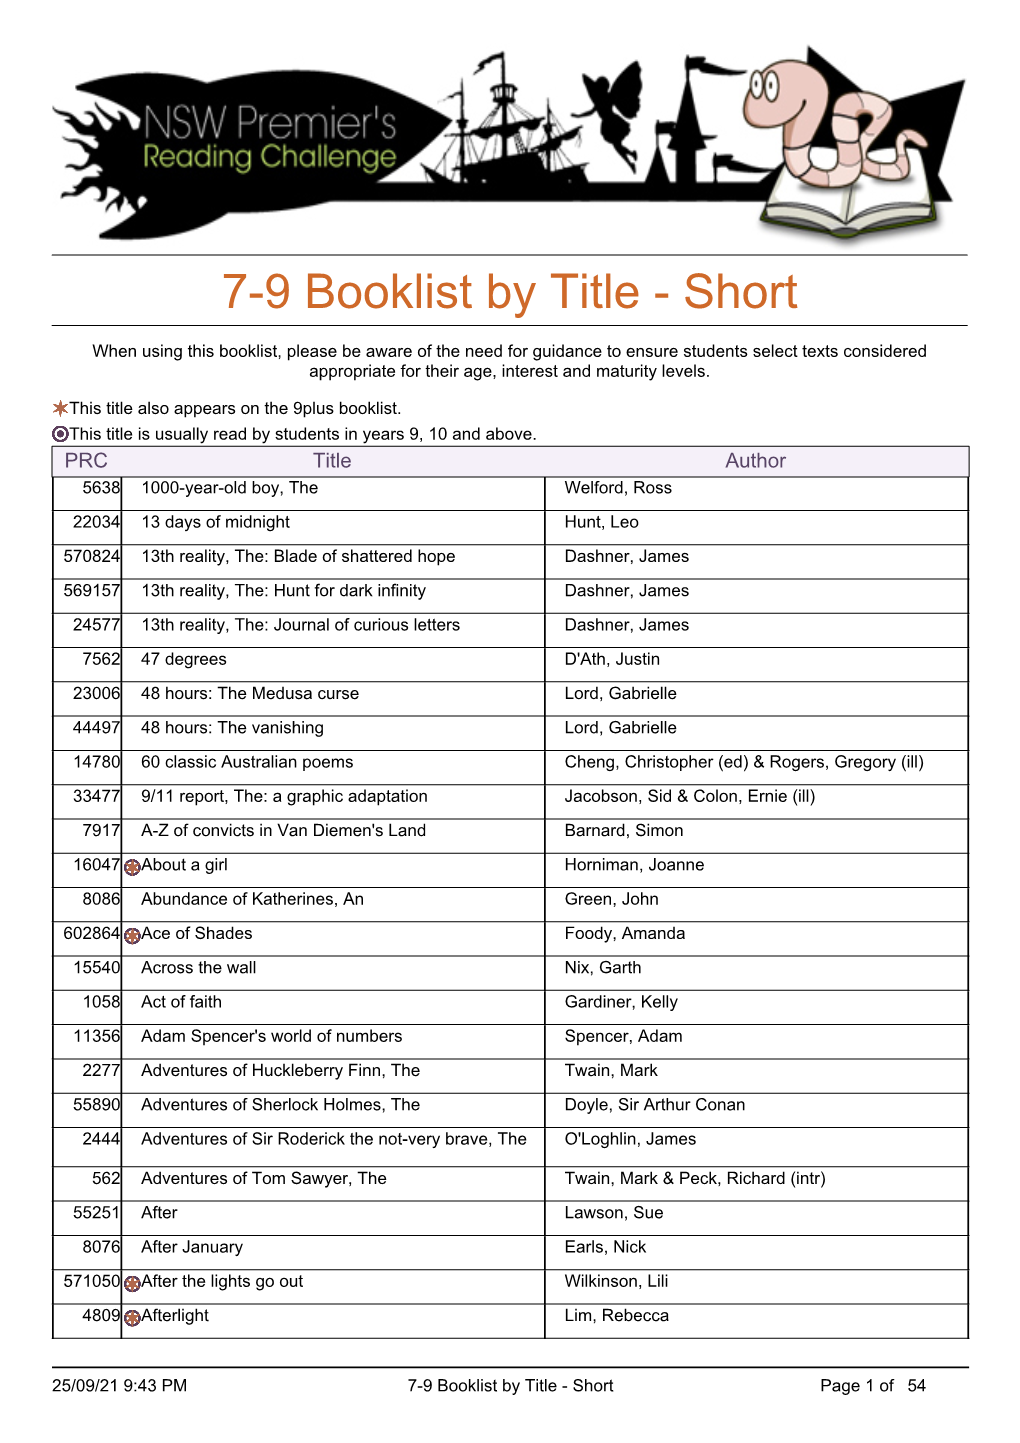 7-9 Booklist by Title - Short